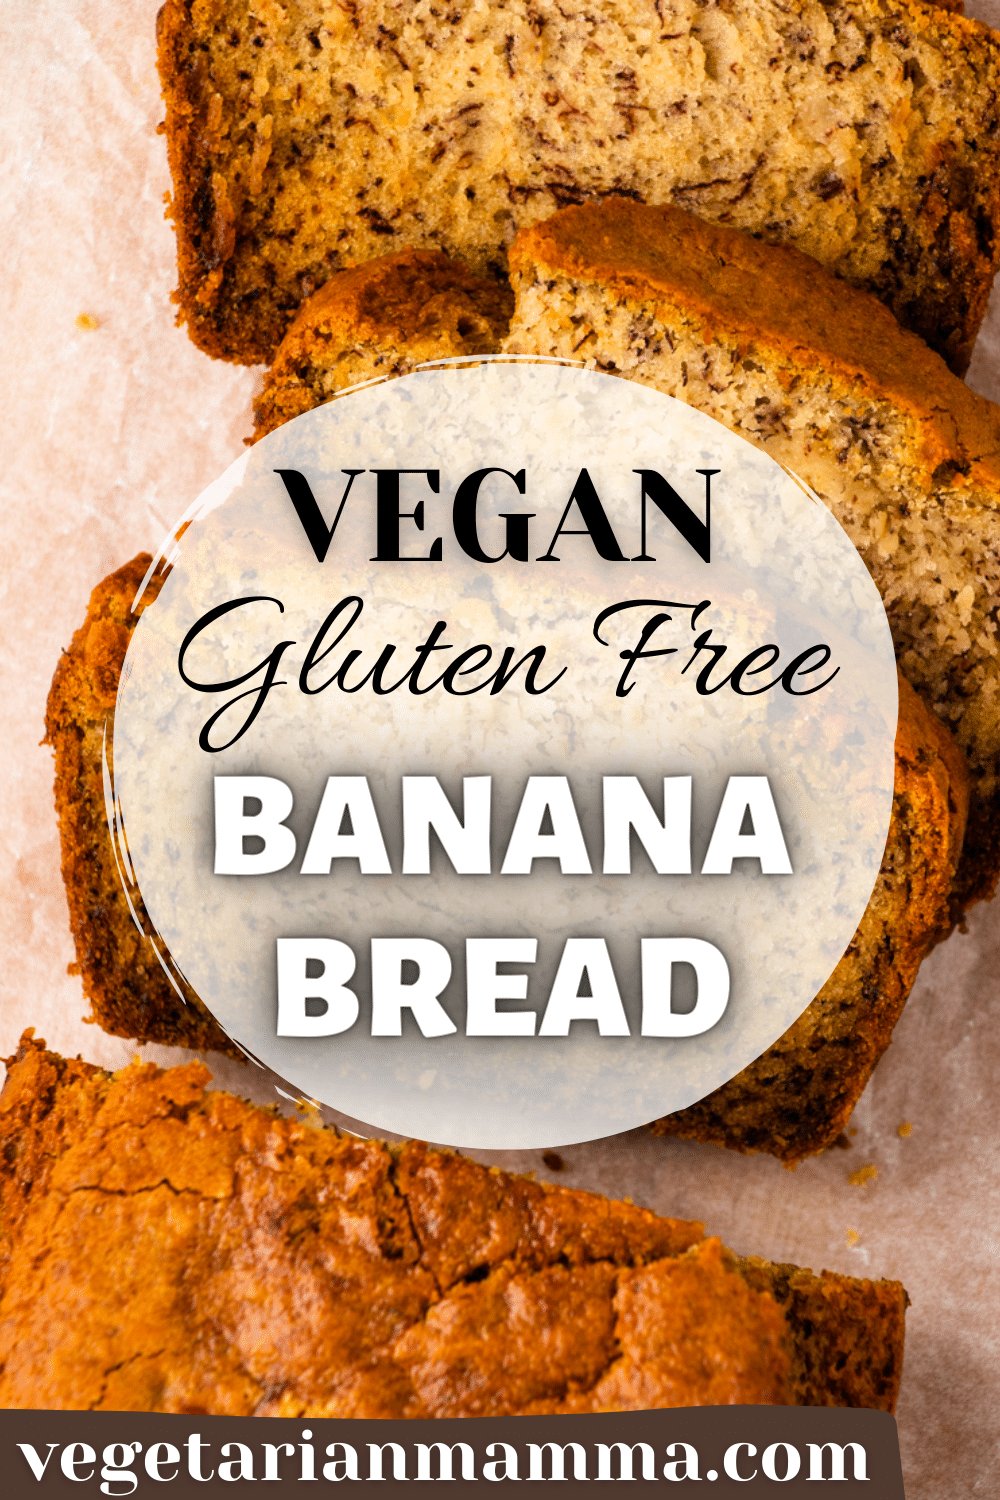 This Vegan Banana Bread is super moist and packed with flavor! Make this gluten-free bread for breakfast, snacks, or even dessert. Perfect for breakfast on-the-go.